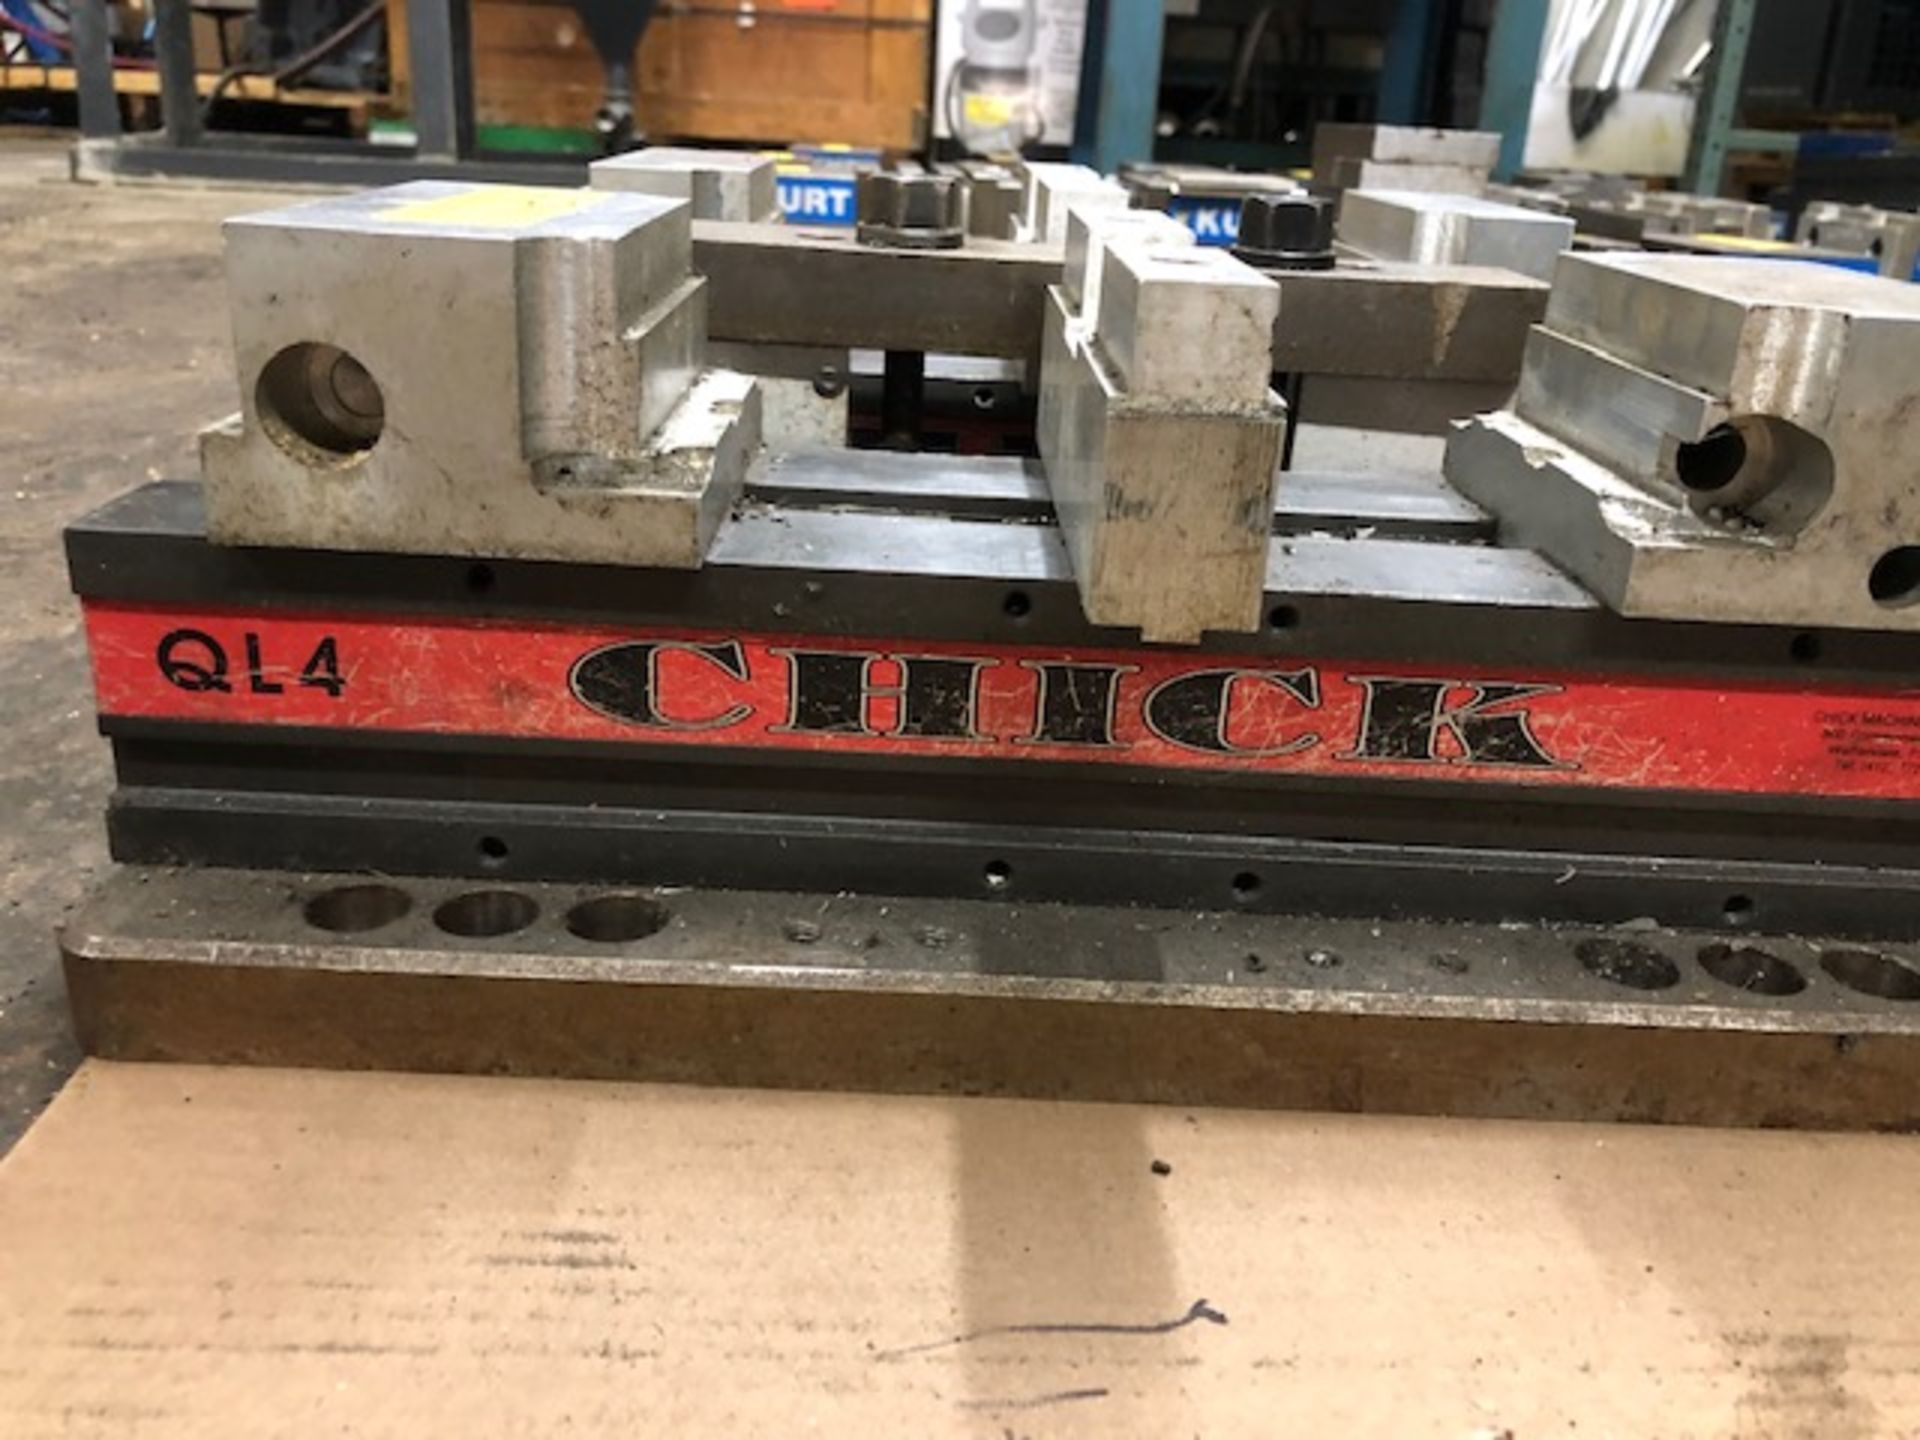 (2) CHICK 4” MODEL QL-4 VISES MOUNTED ON COMMON PLATE LOADING FEE: NO CHARGE - Image 2 of 2